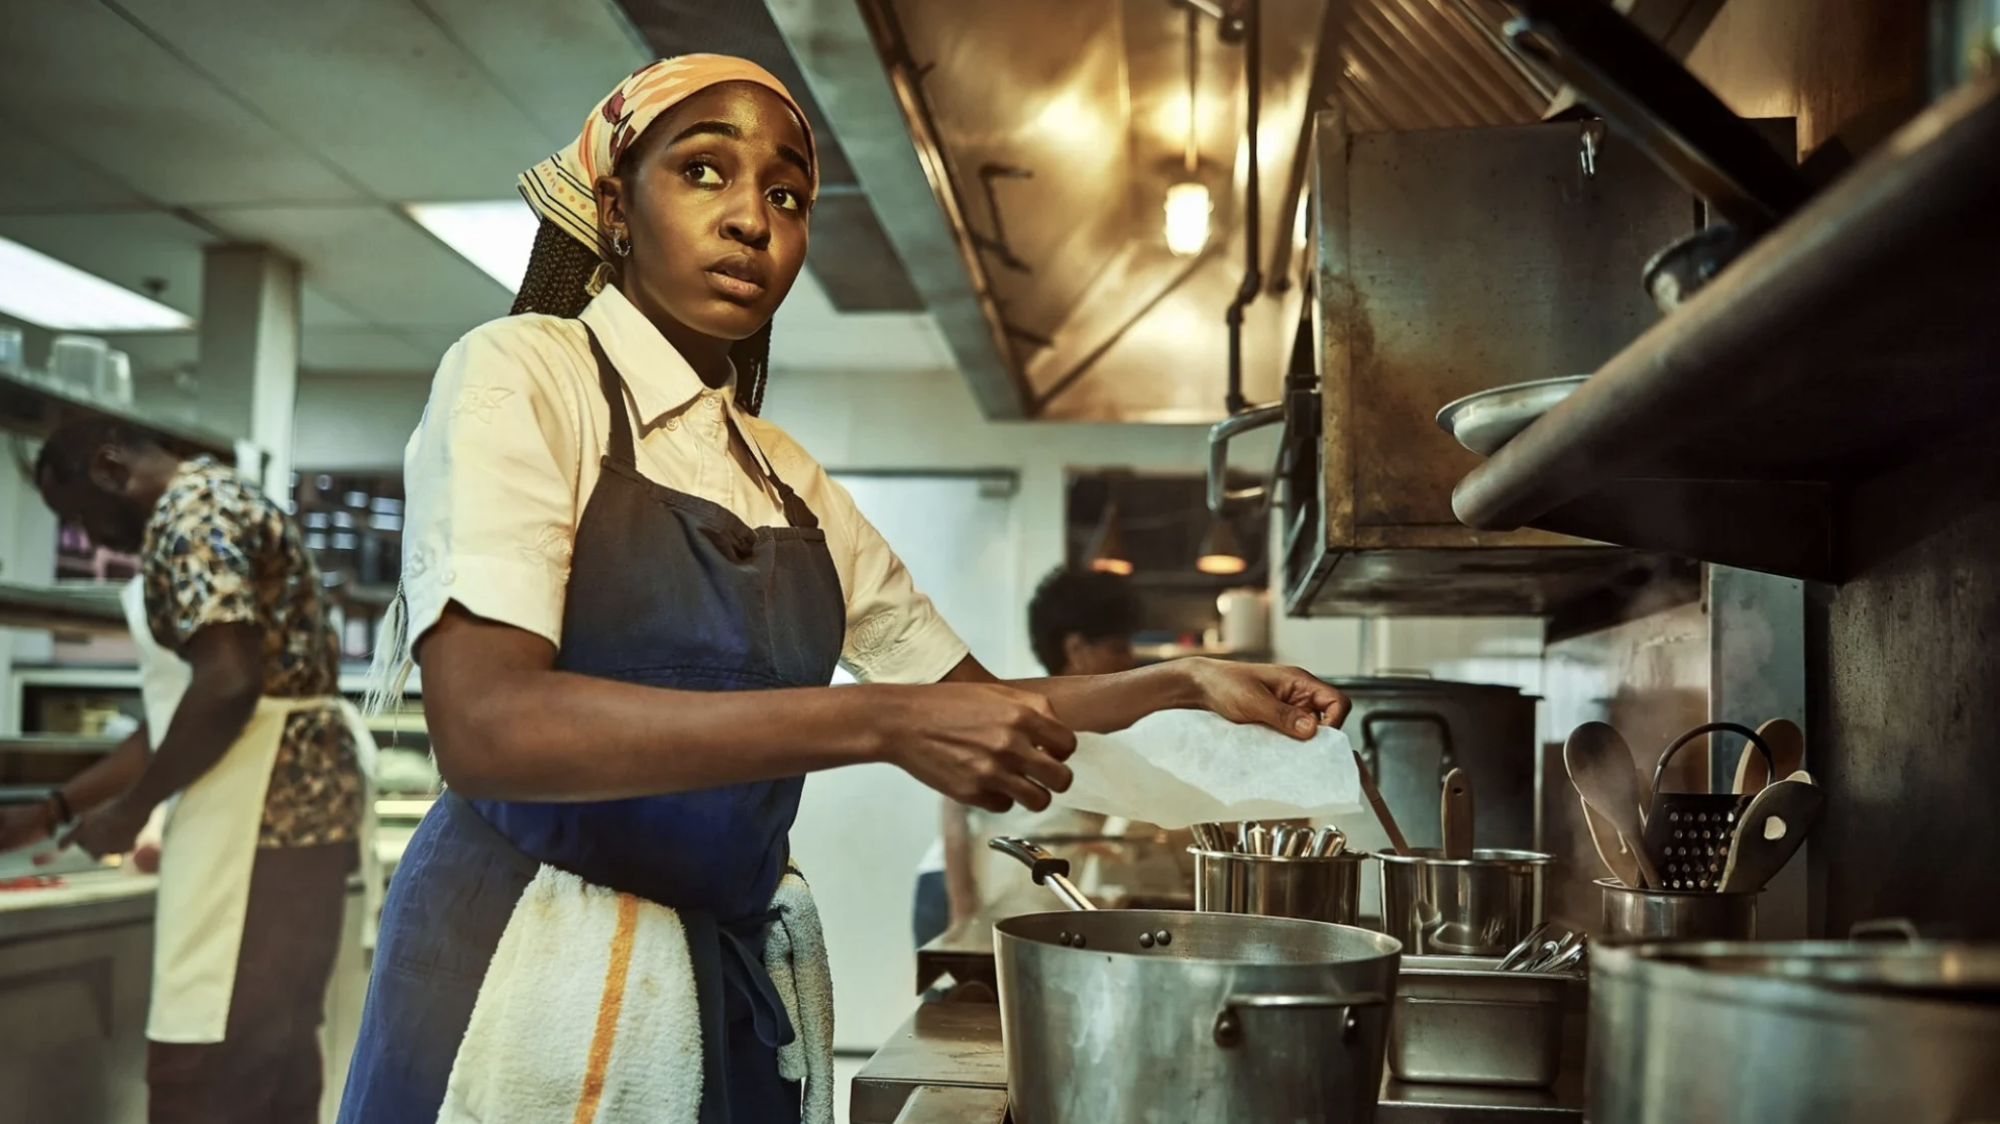 A woman wearing chef's clothes stands in a restaurant kitchen.